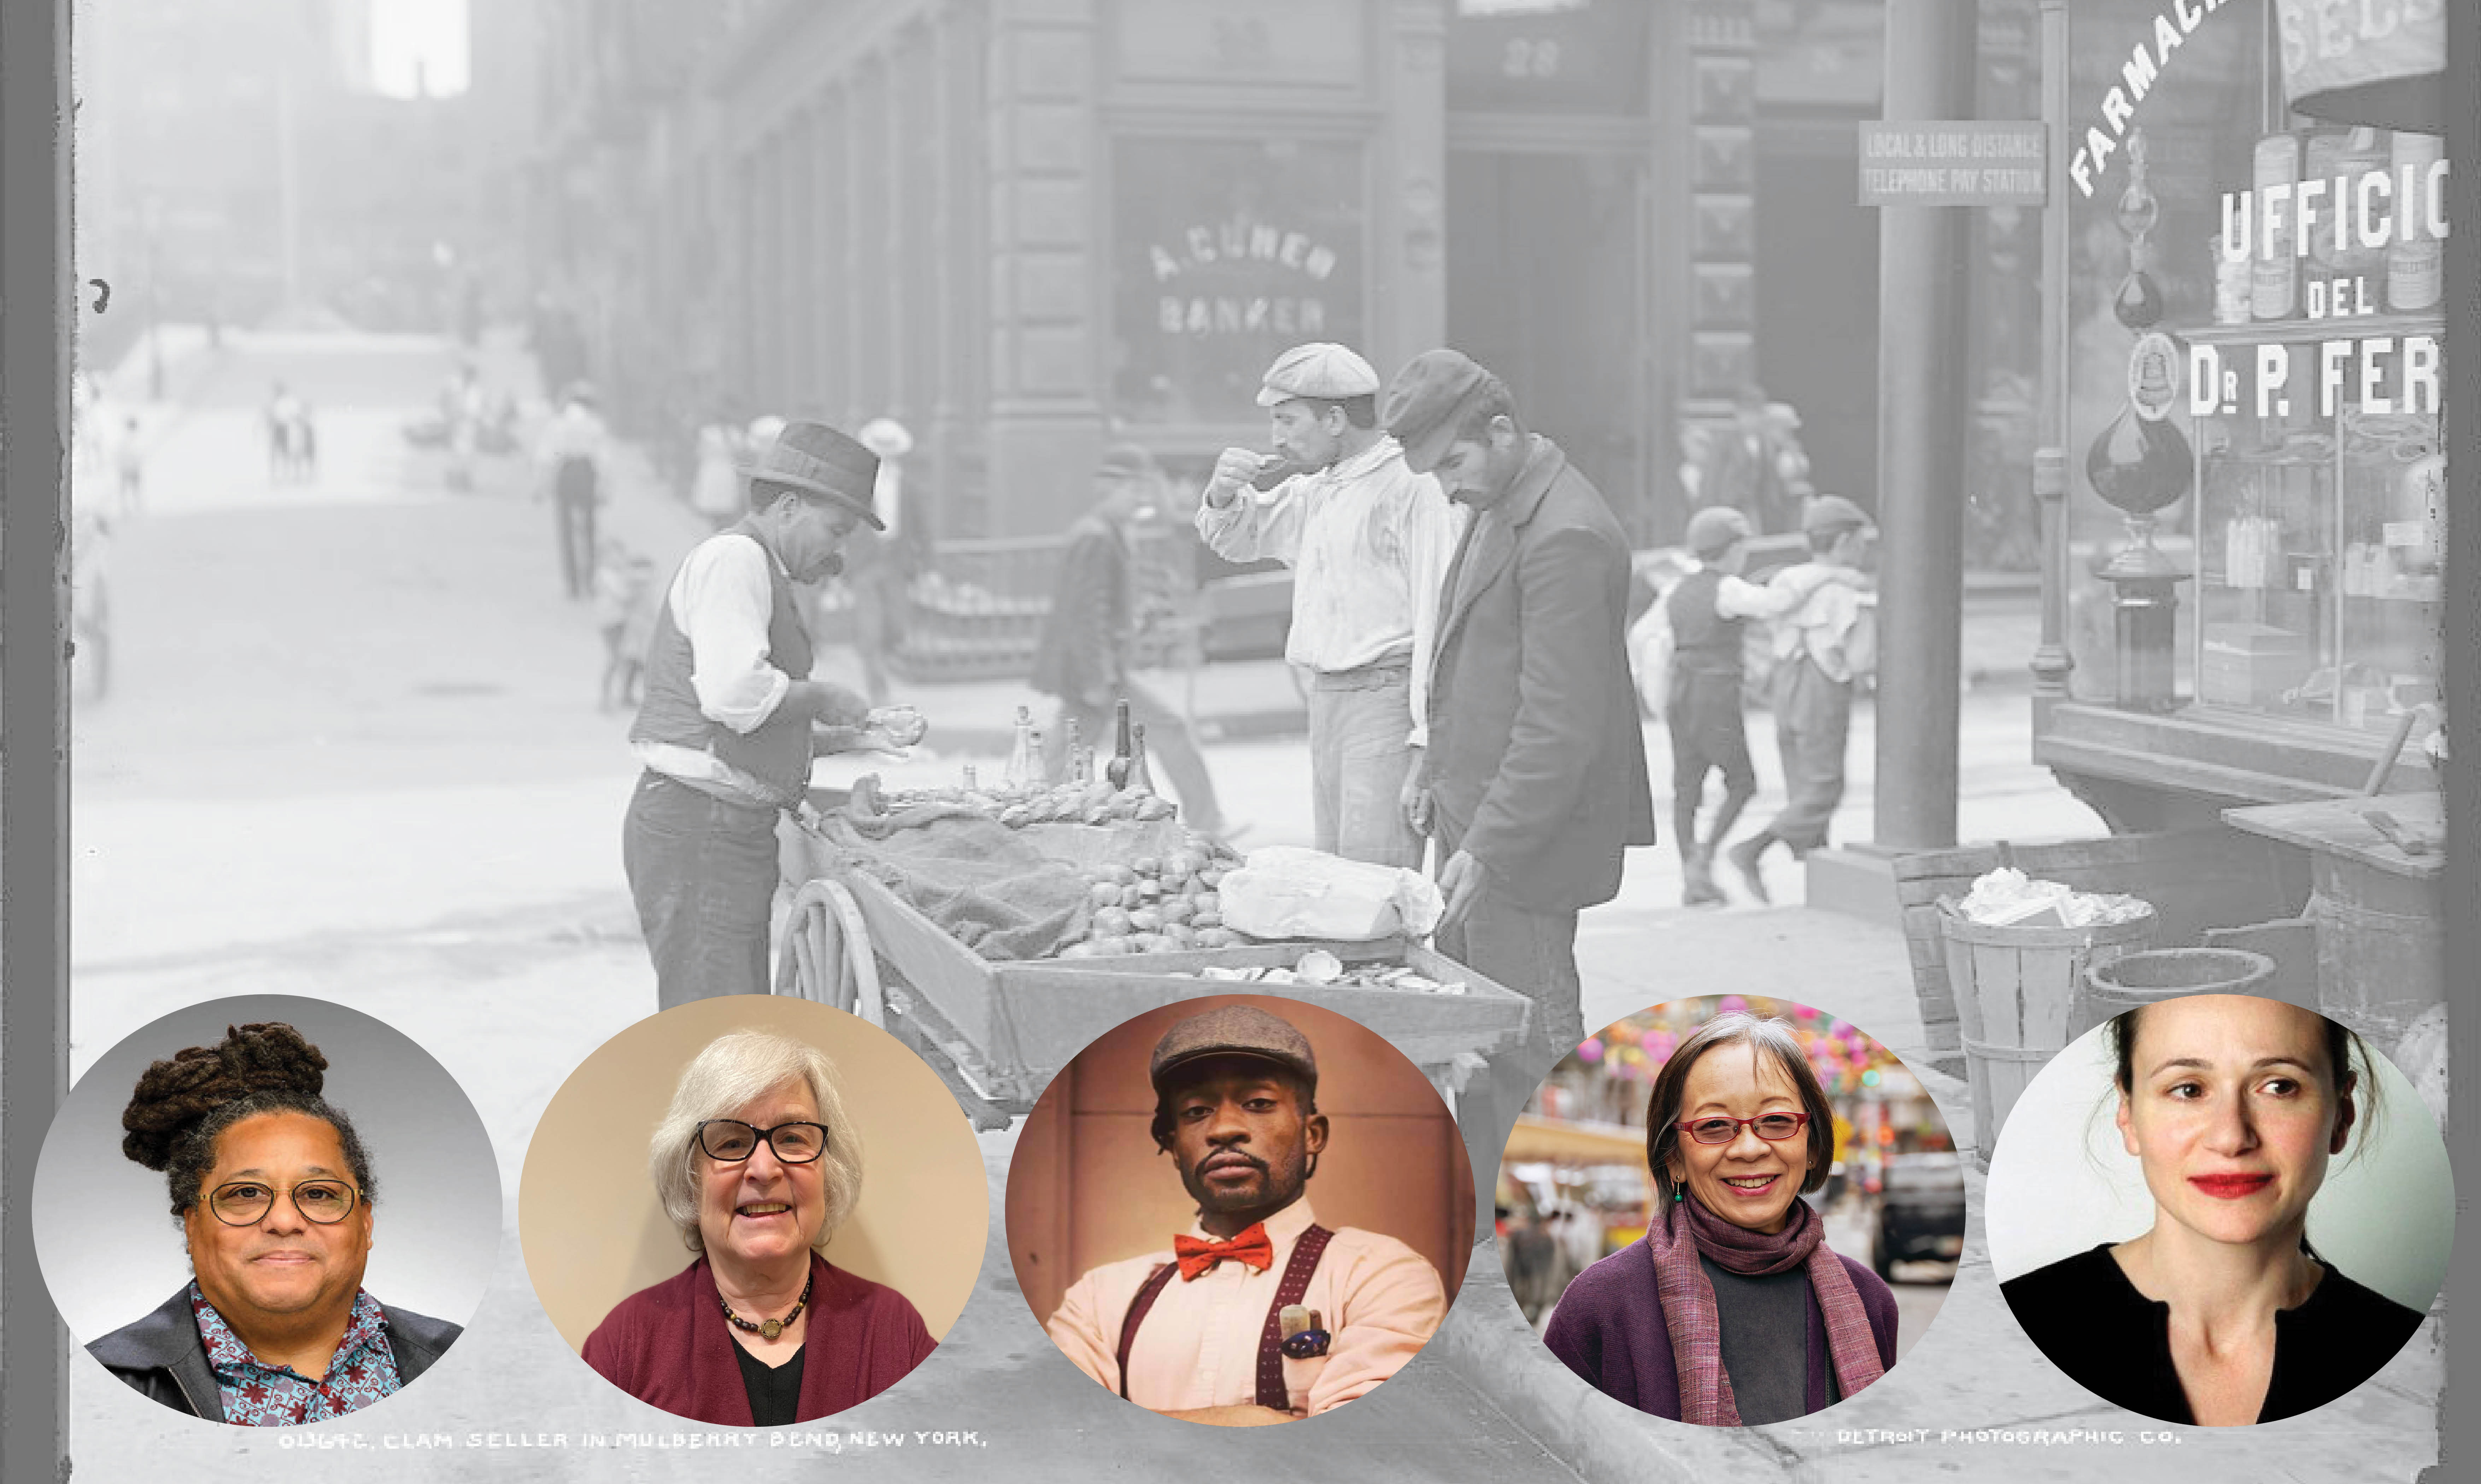 In the background, a photo of a clam seller in Mulberry Bend, NY, in 1900. There are four men standing around a clam cart on the street. On the bottom of the photo are 5 headshots. From left to right: Scott Barton, Hasia Diner, Ben Harney, Grace Young, and Julia Moskin. 